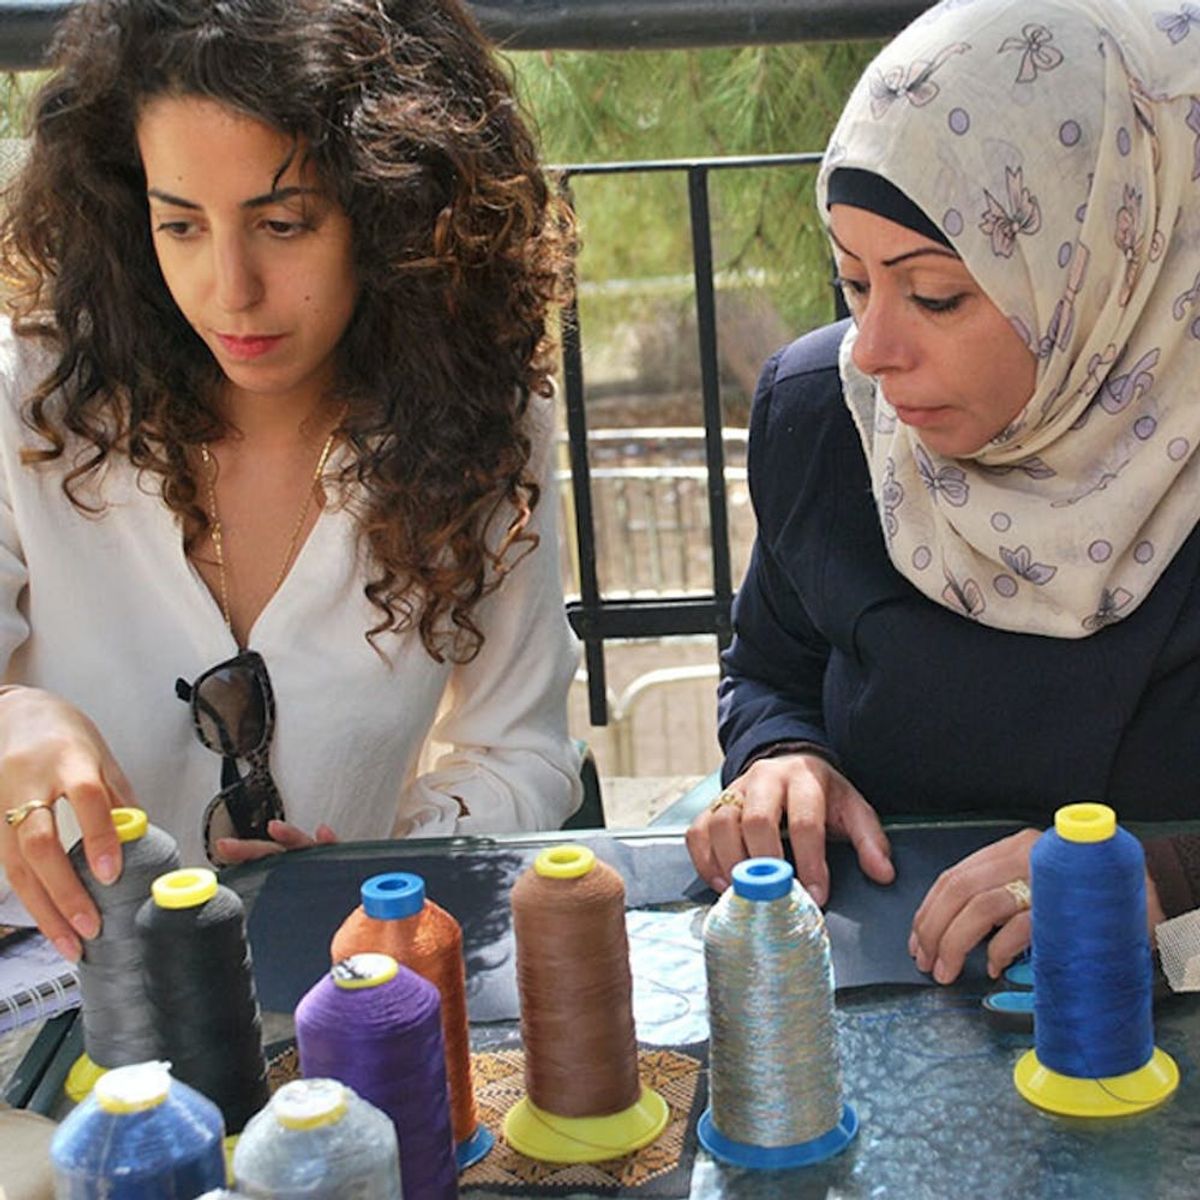 Two Neighbors: Israeli and Palestinian Women Create a Pathway to Peace Through Fashion